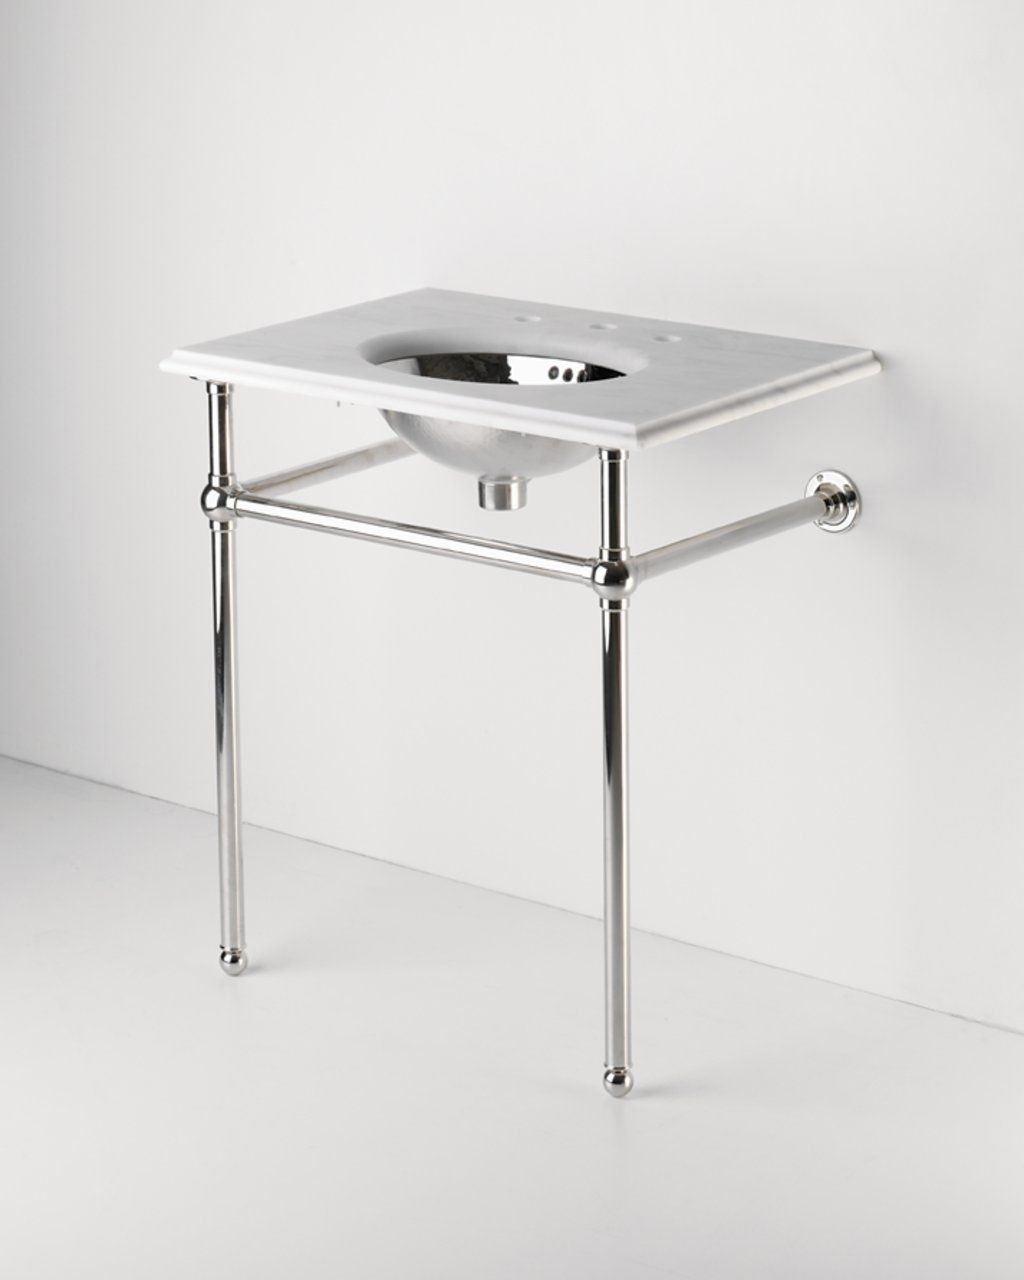 Metal console sink stands